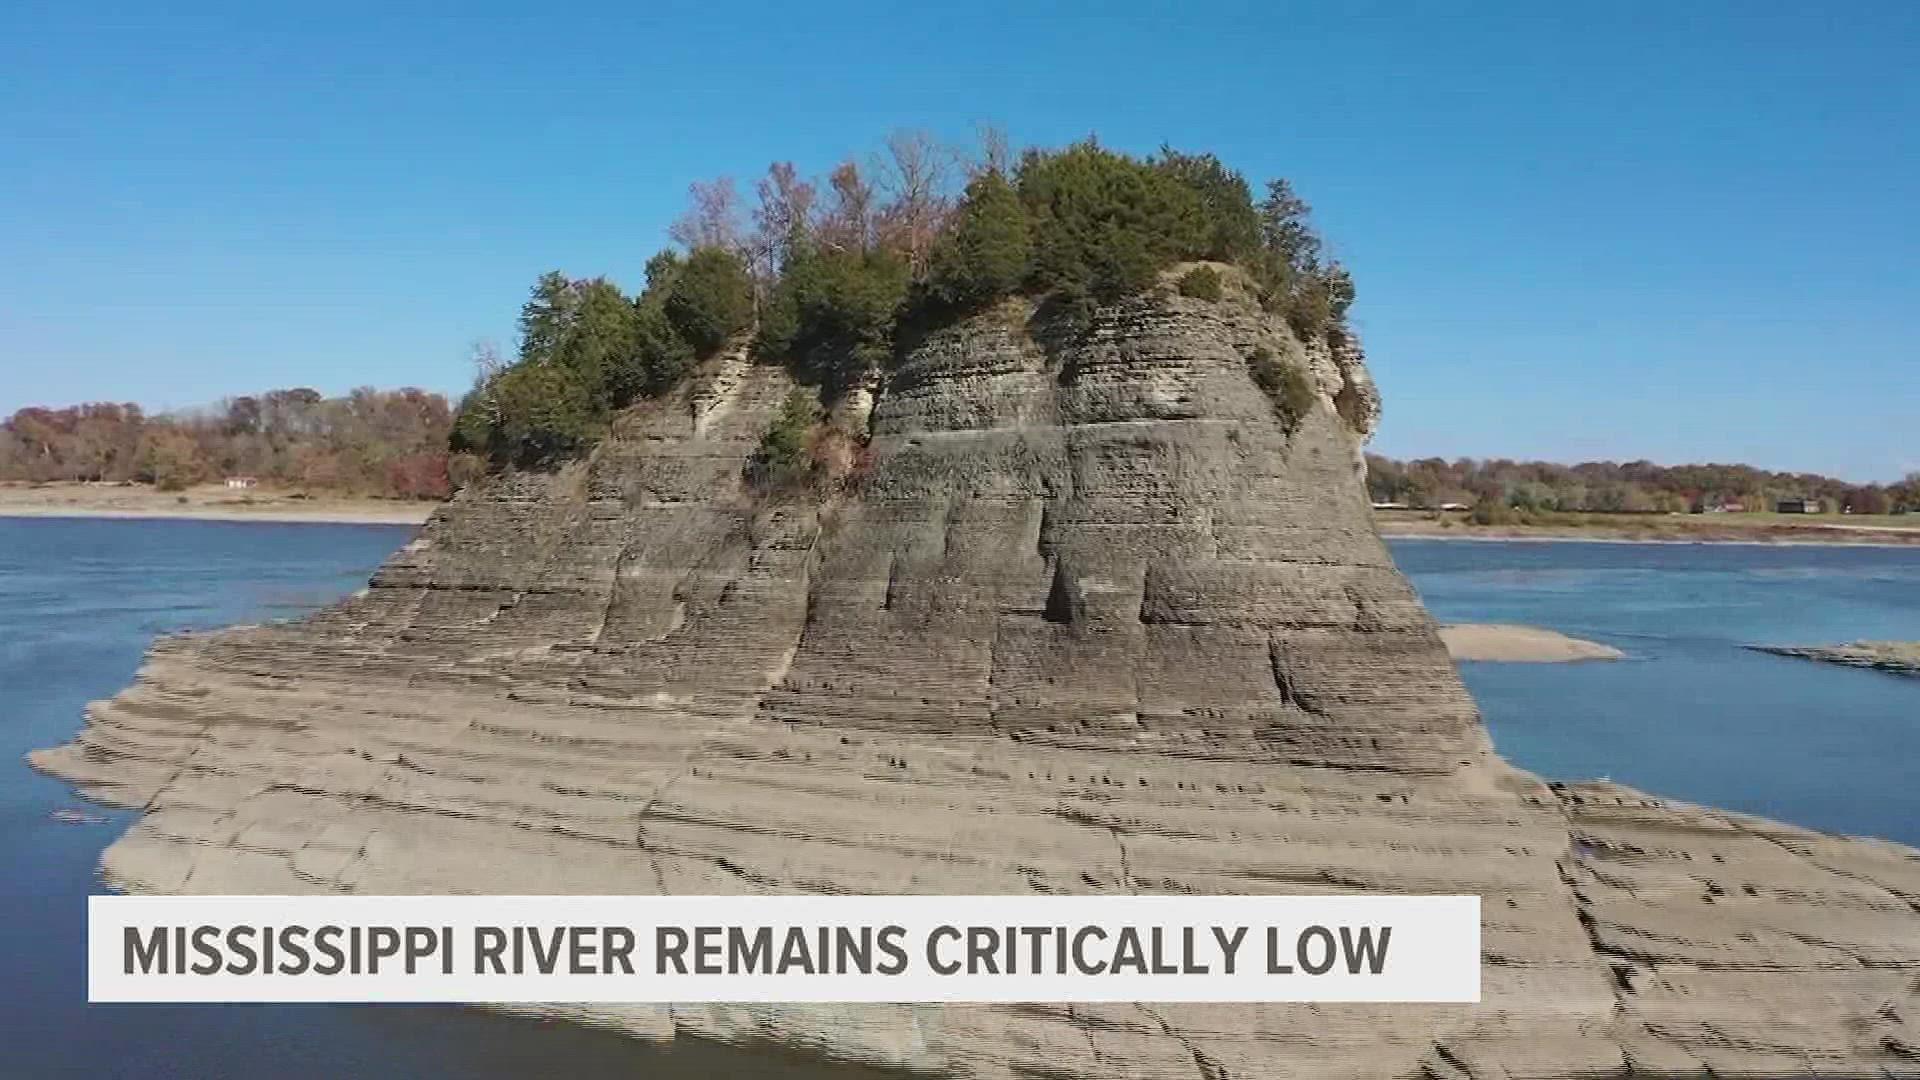 The Mississippi River level remains critically low at this point, impacting locks and dams as well as farmers.